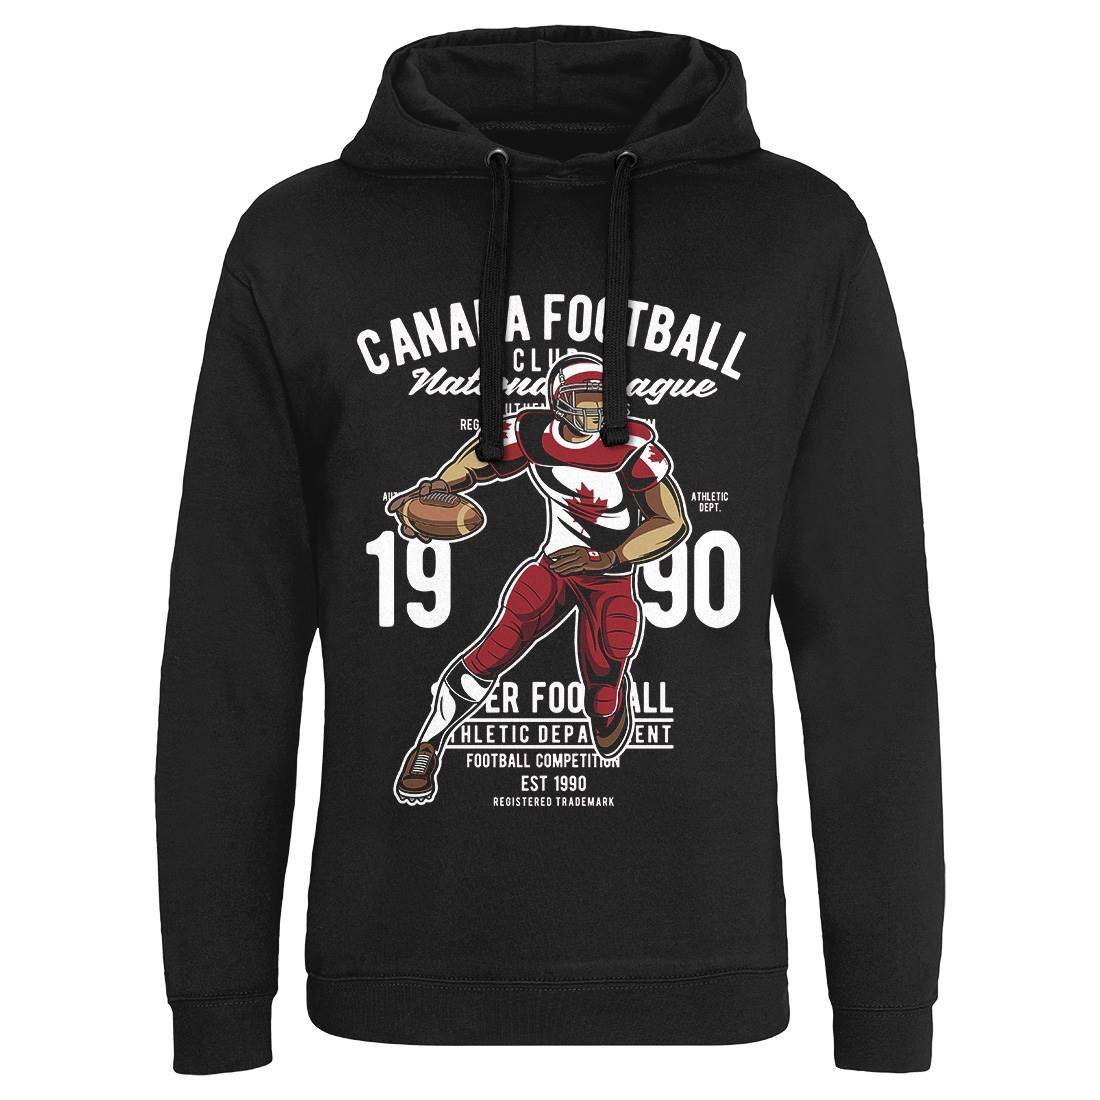 Canada Football Mens Hoodie Without Pocket Sport C326